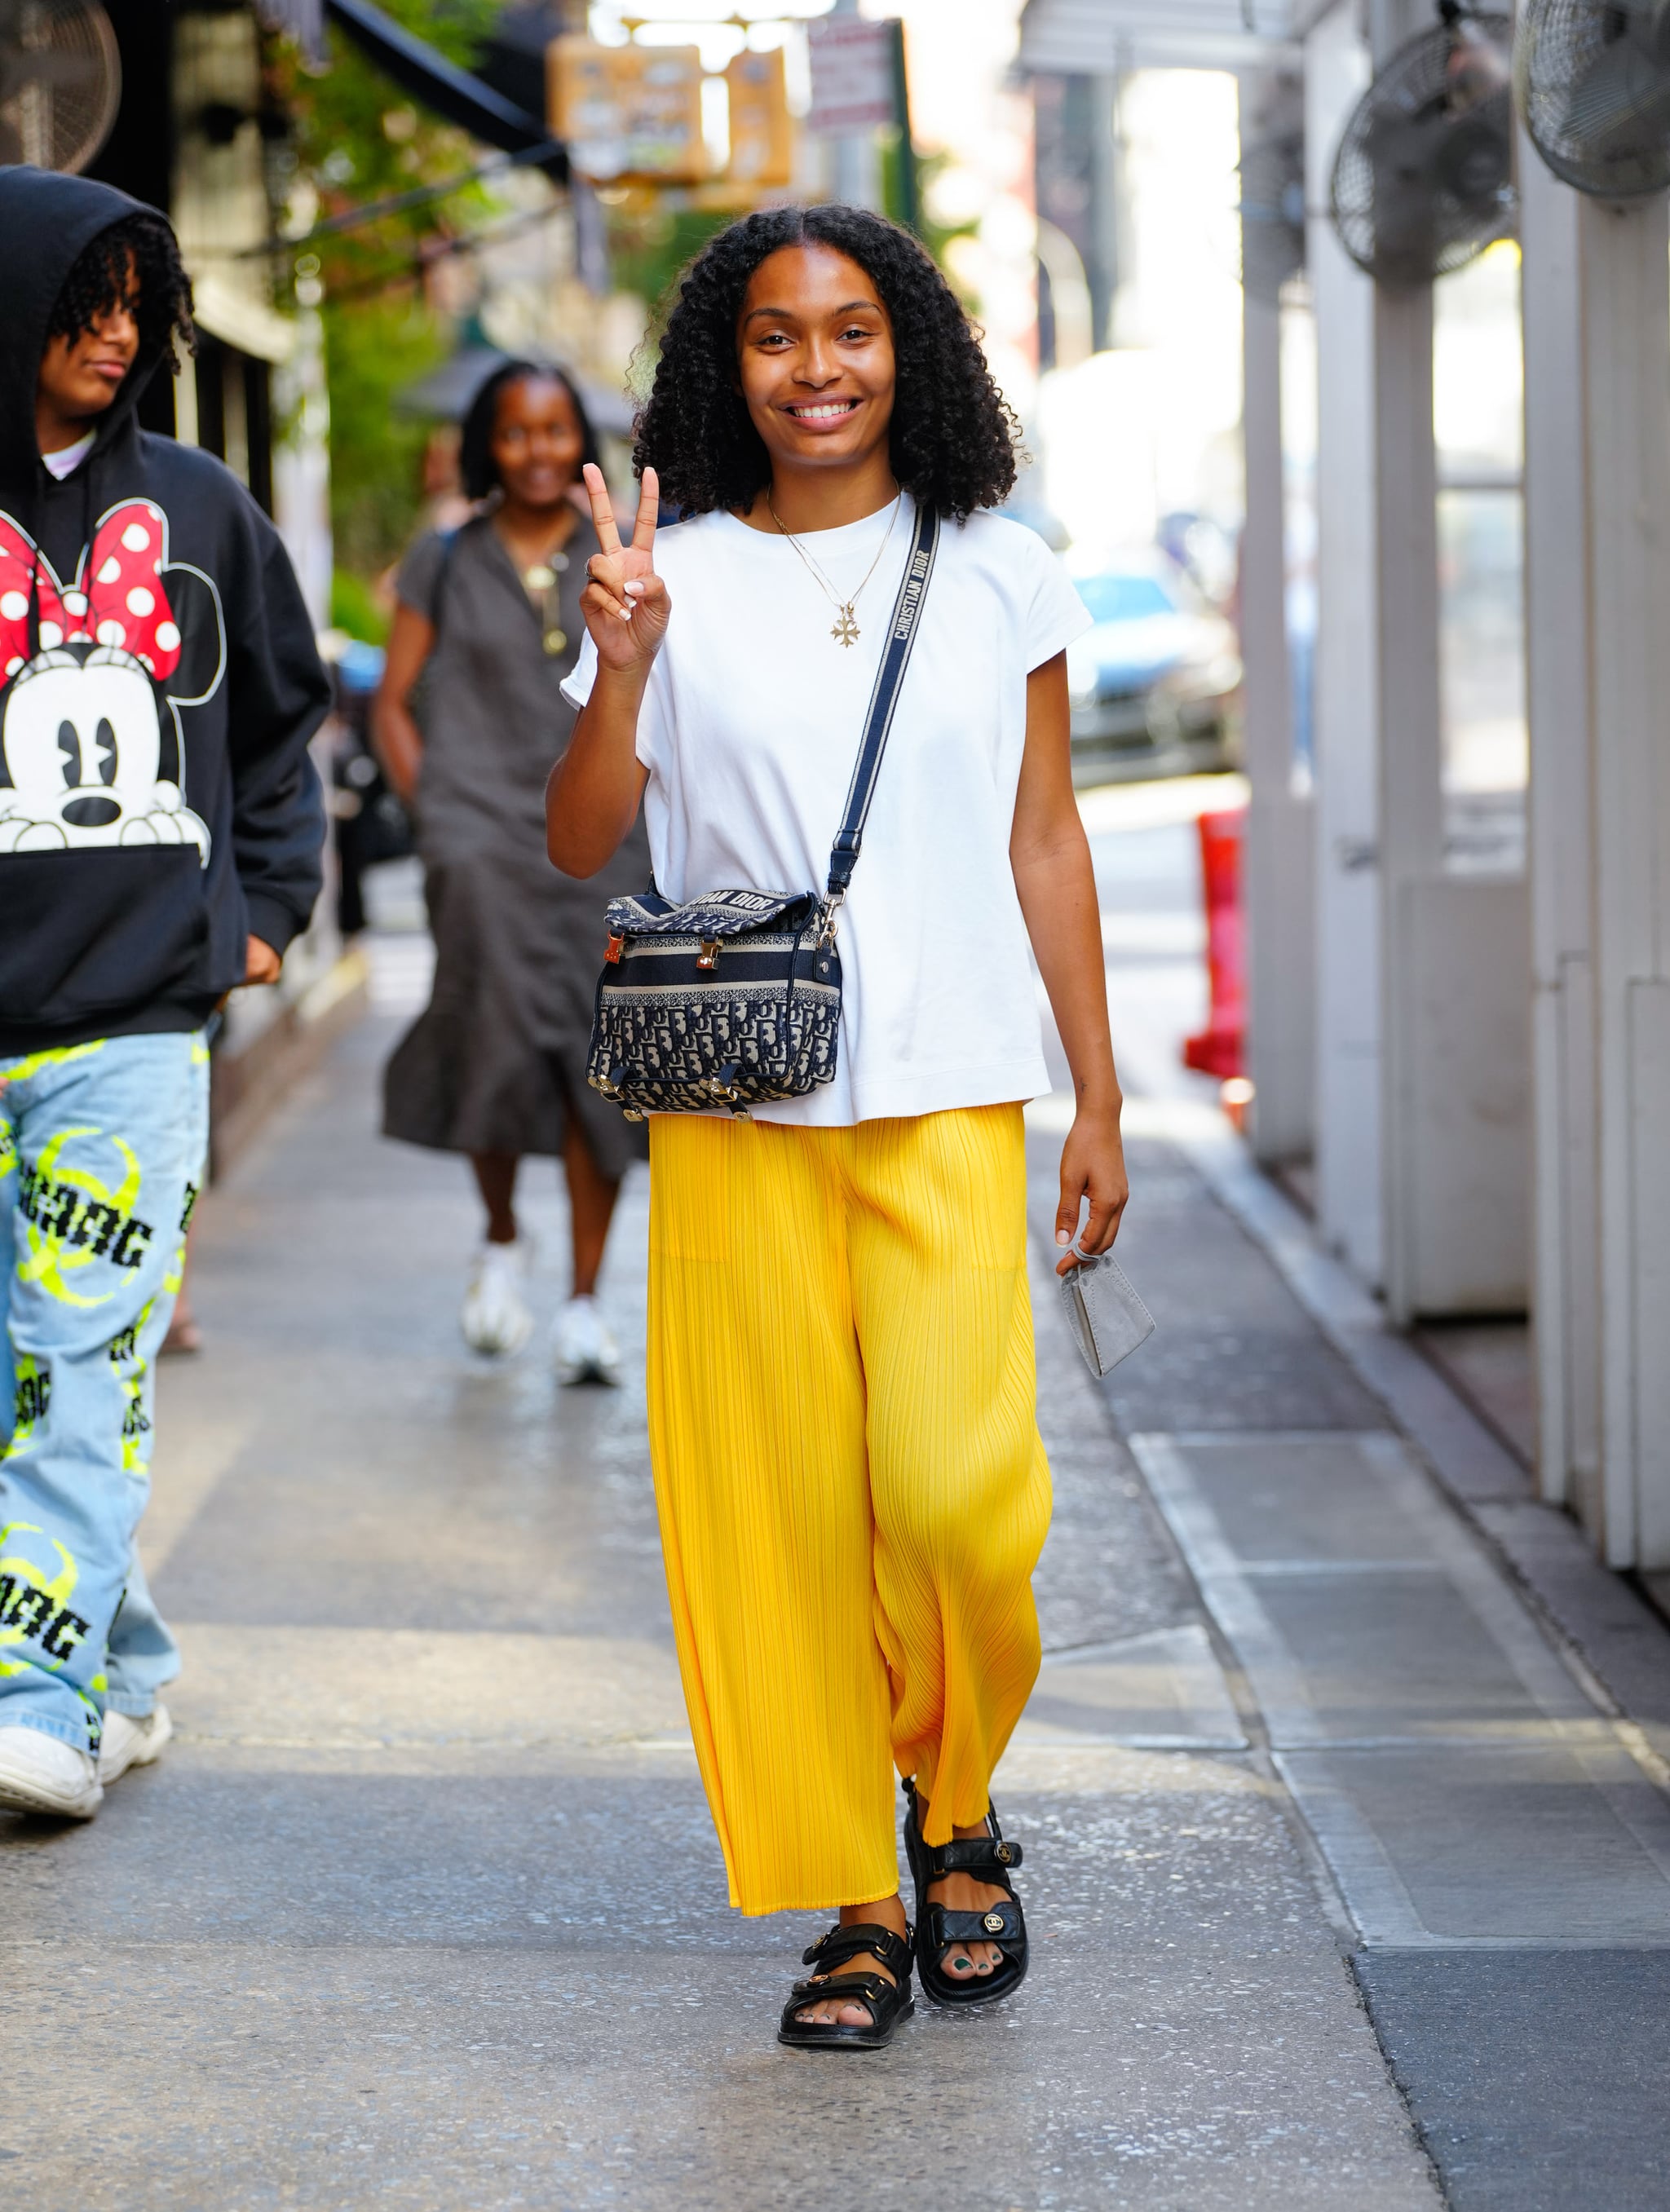 NEW YORK, NEW YORK - AUGUST 16: Yara Shahidi is seen out and about on August 16, 2022 in New York City. (Photo by Gotham/GC Images)